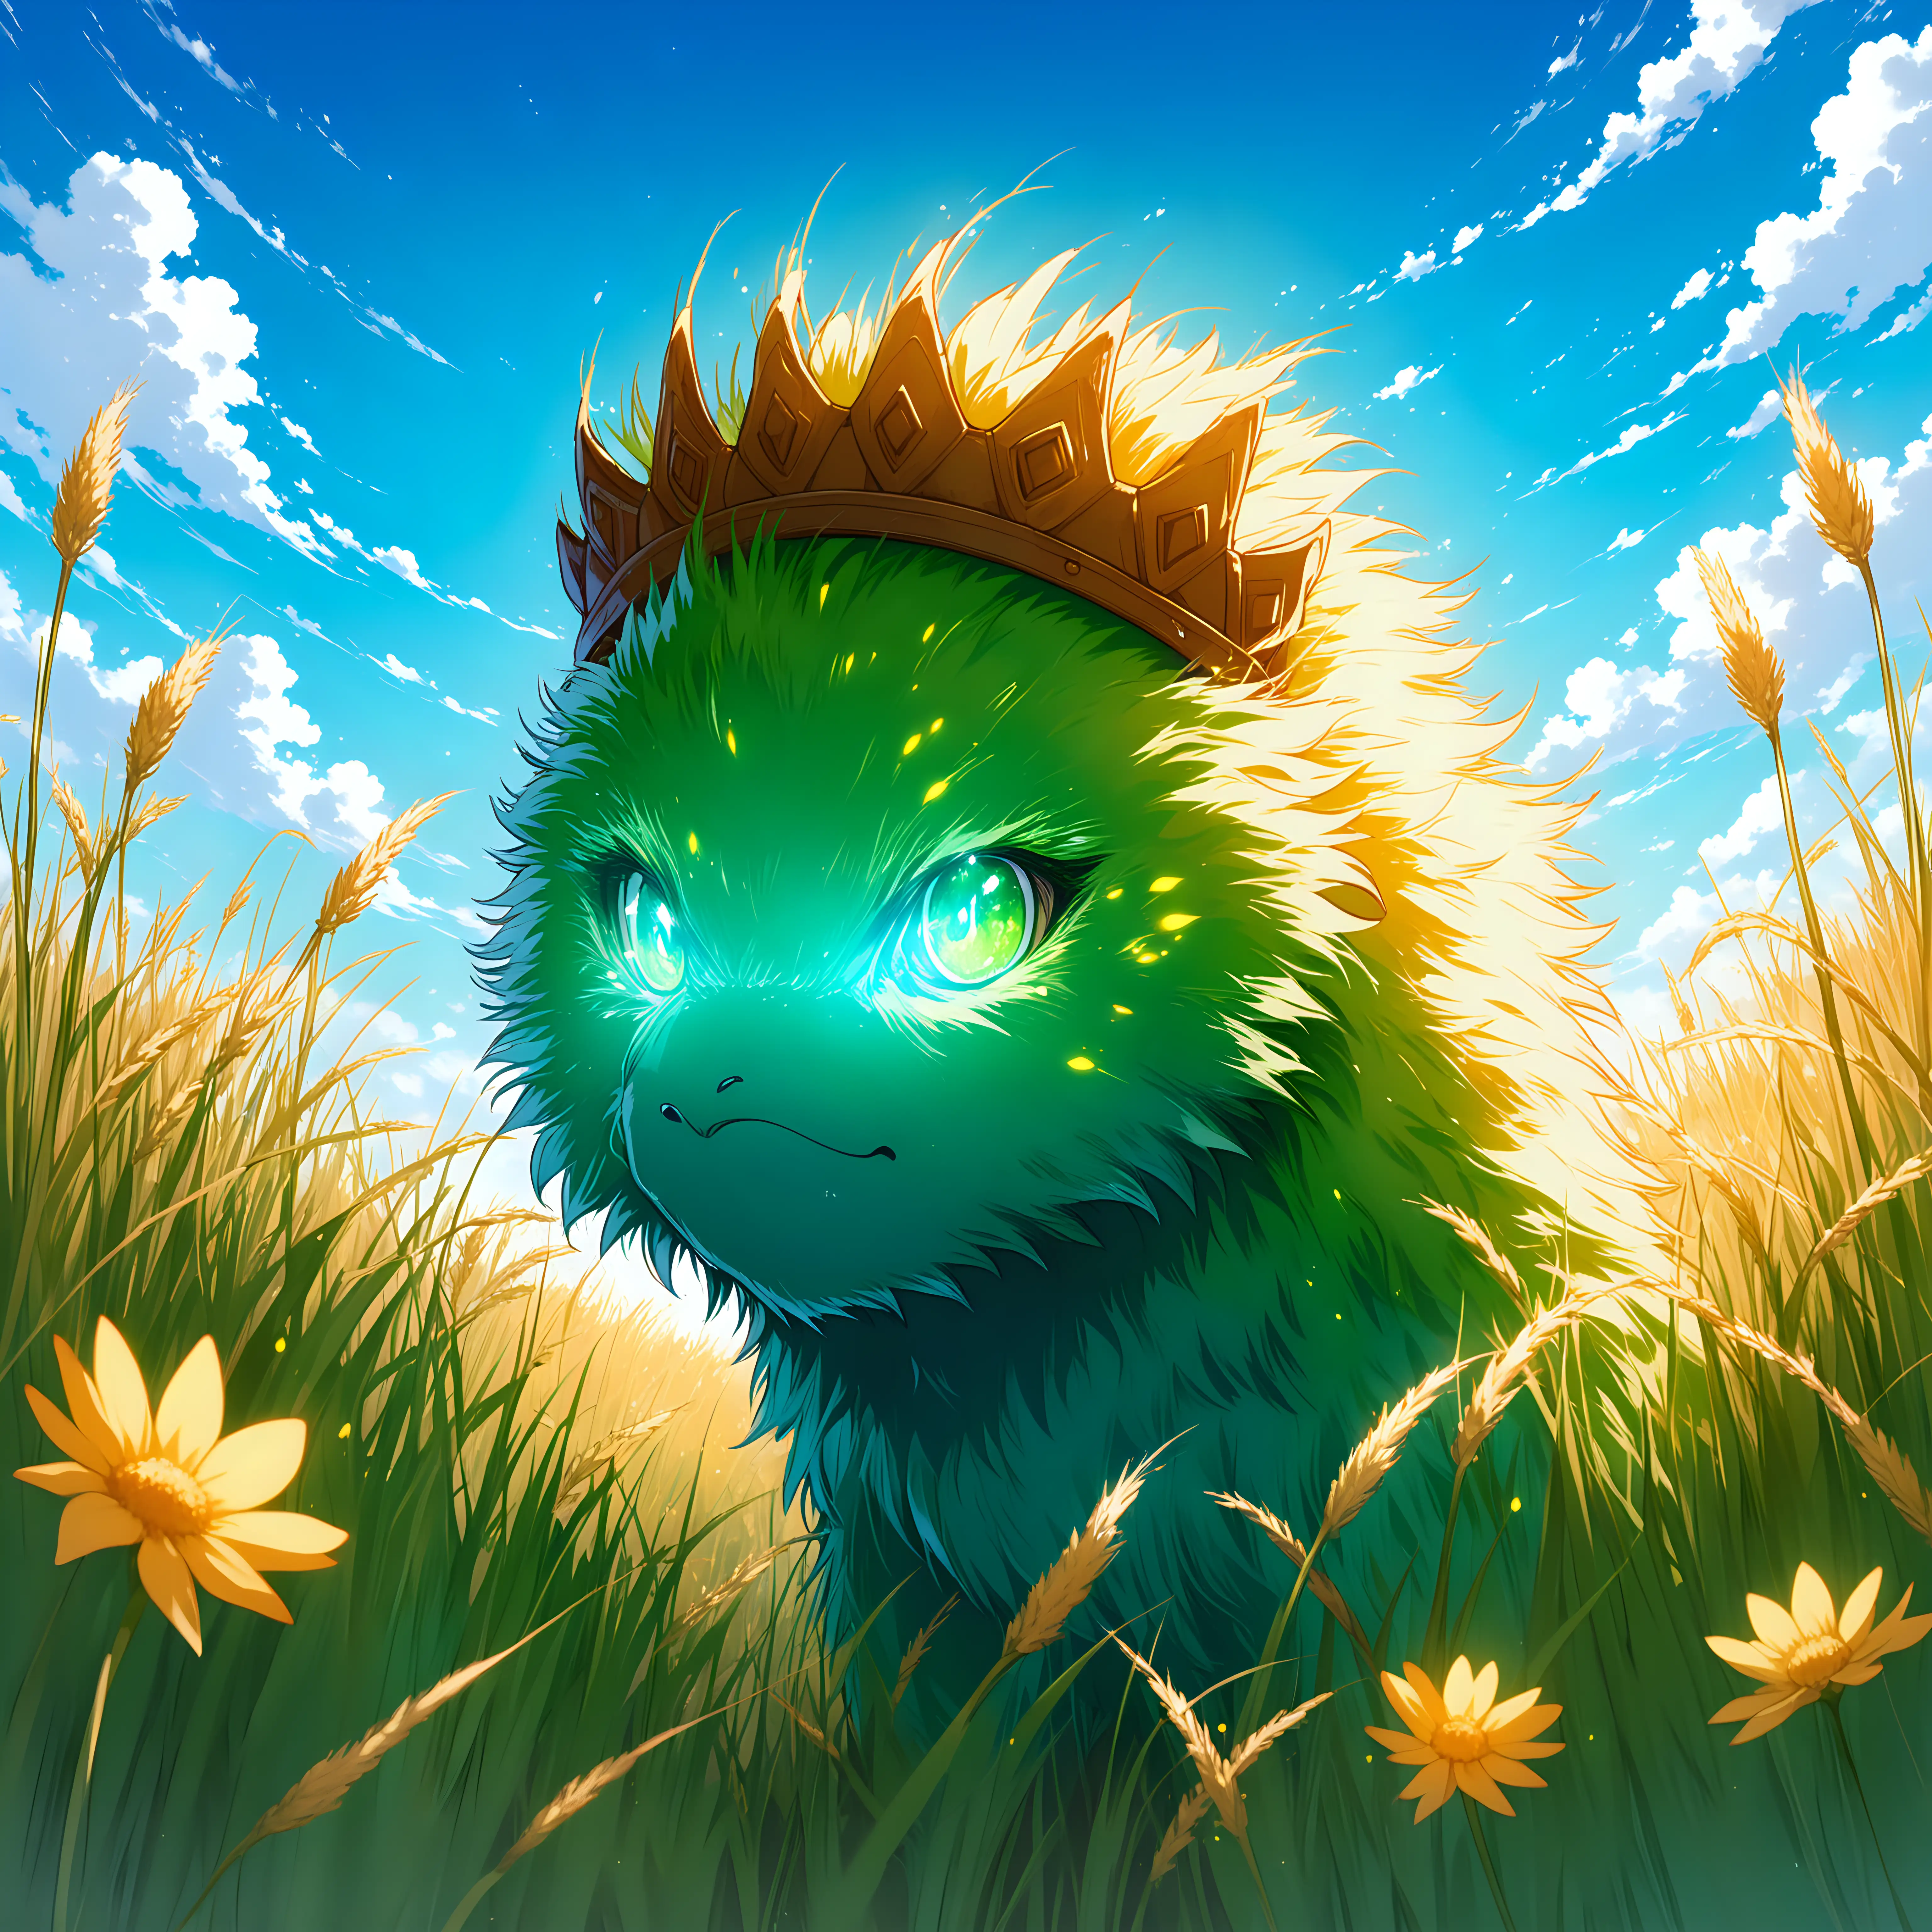 A fighting creature, lives in the prairie, view up at it, blends in with the delicate wildflowers, he wears a grass crown of dry grasses, he hides well, he has anger in his eyes, foghting anime creature, bright, down-lit, greens, yellows, beige, ocre, vibrant colors, blue sky, level 3625, high definition, eyes glowing, medium-high contrast, blue, teal, aqua sky